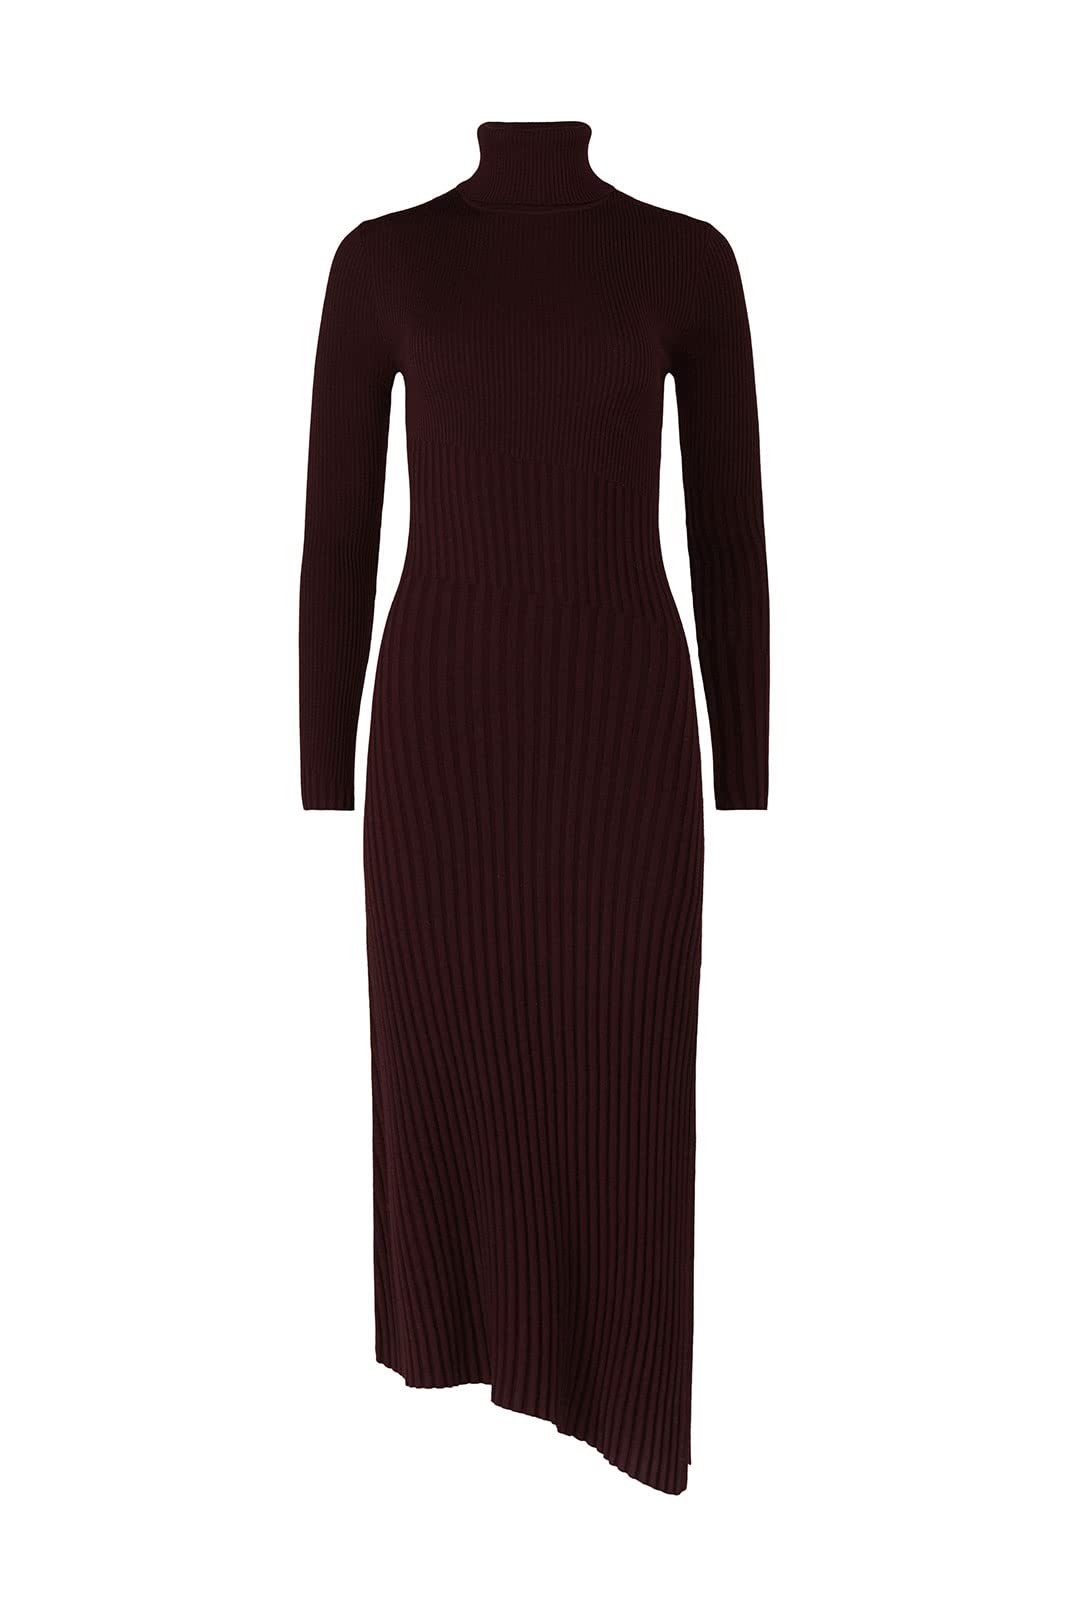 A.L.C. Rent the Runway Pre-Loved Emmy Turtleneck Dress, Brown, X-Small